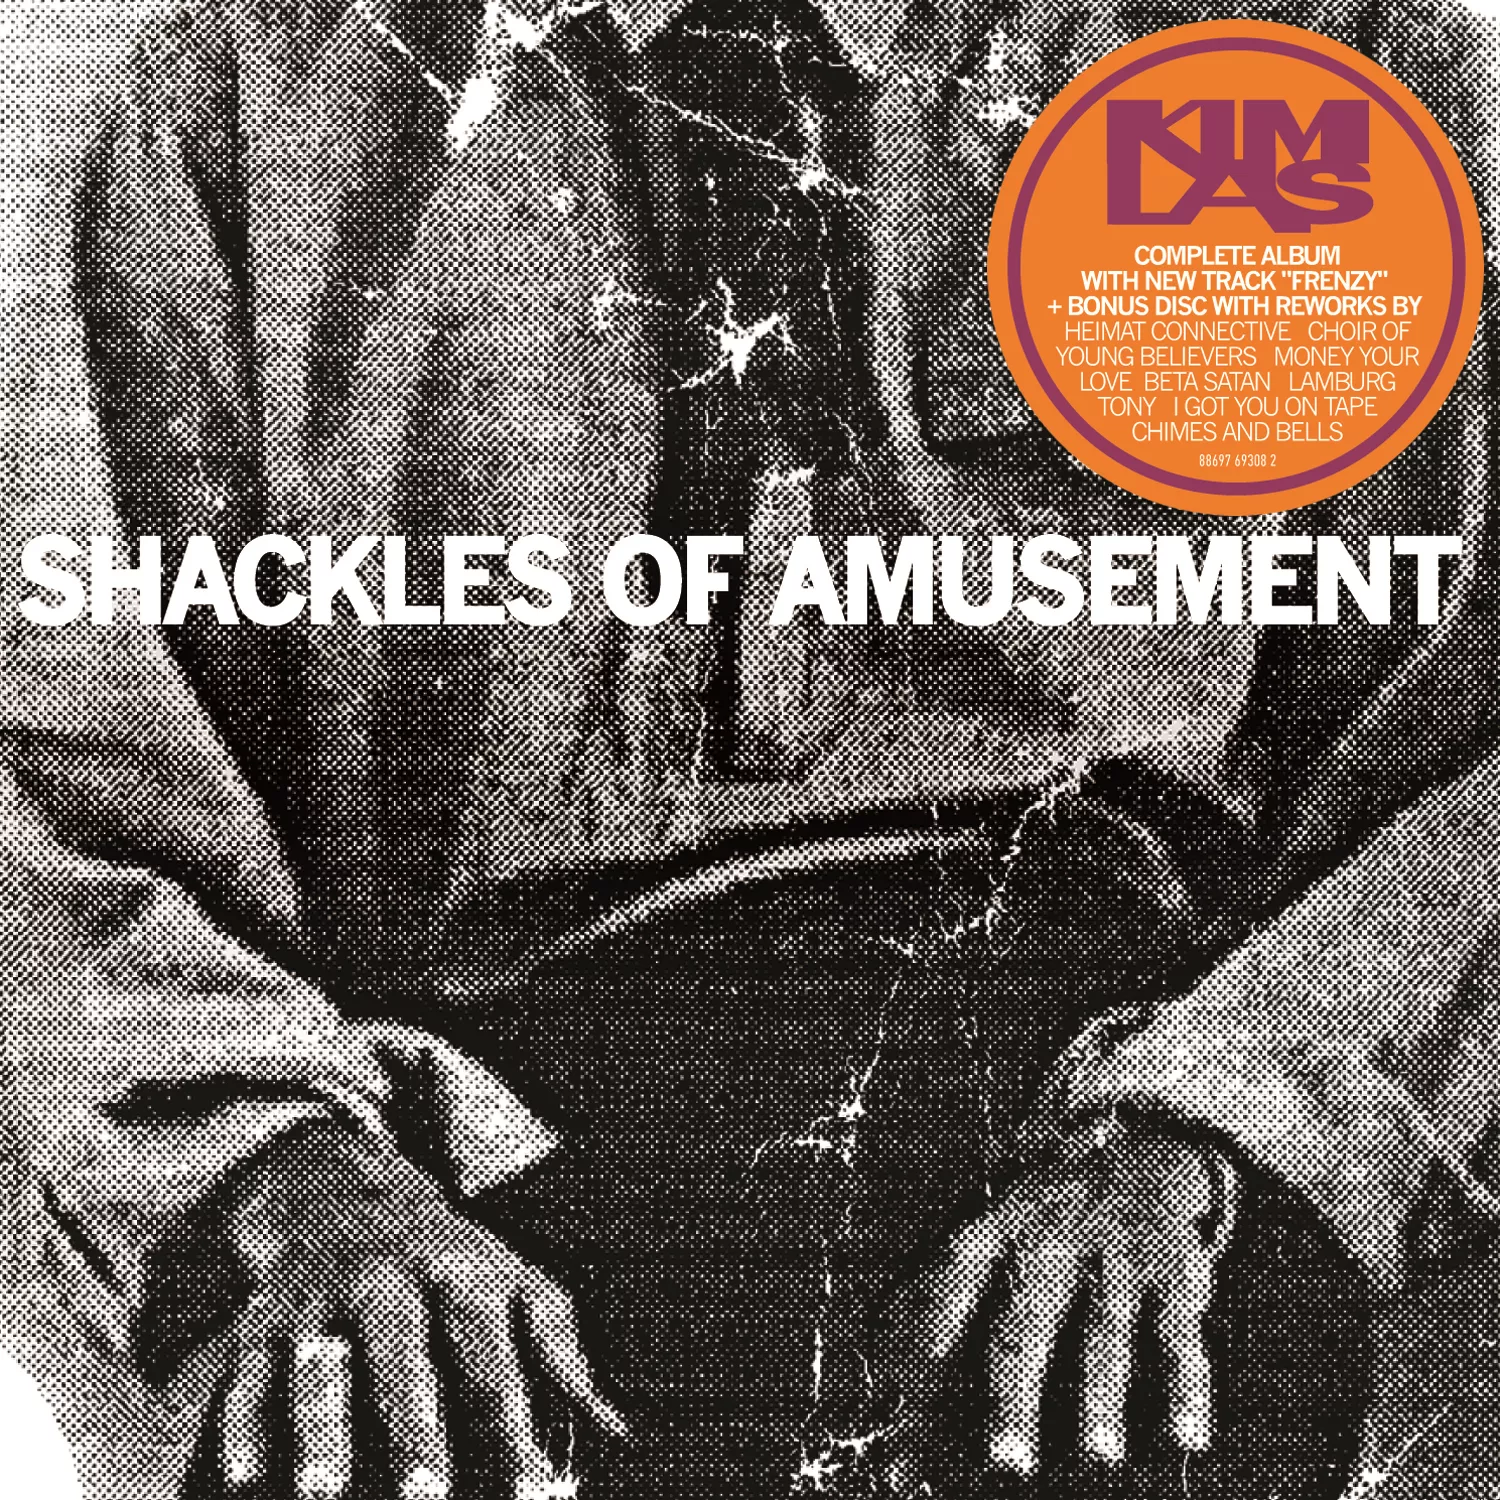 The Shackles Of Amusement / Three Times Rediscovered - Kim Las